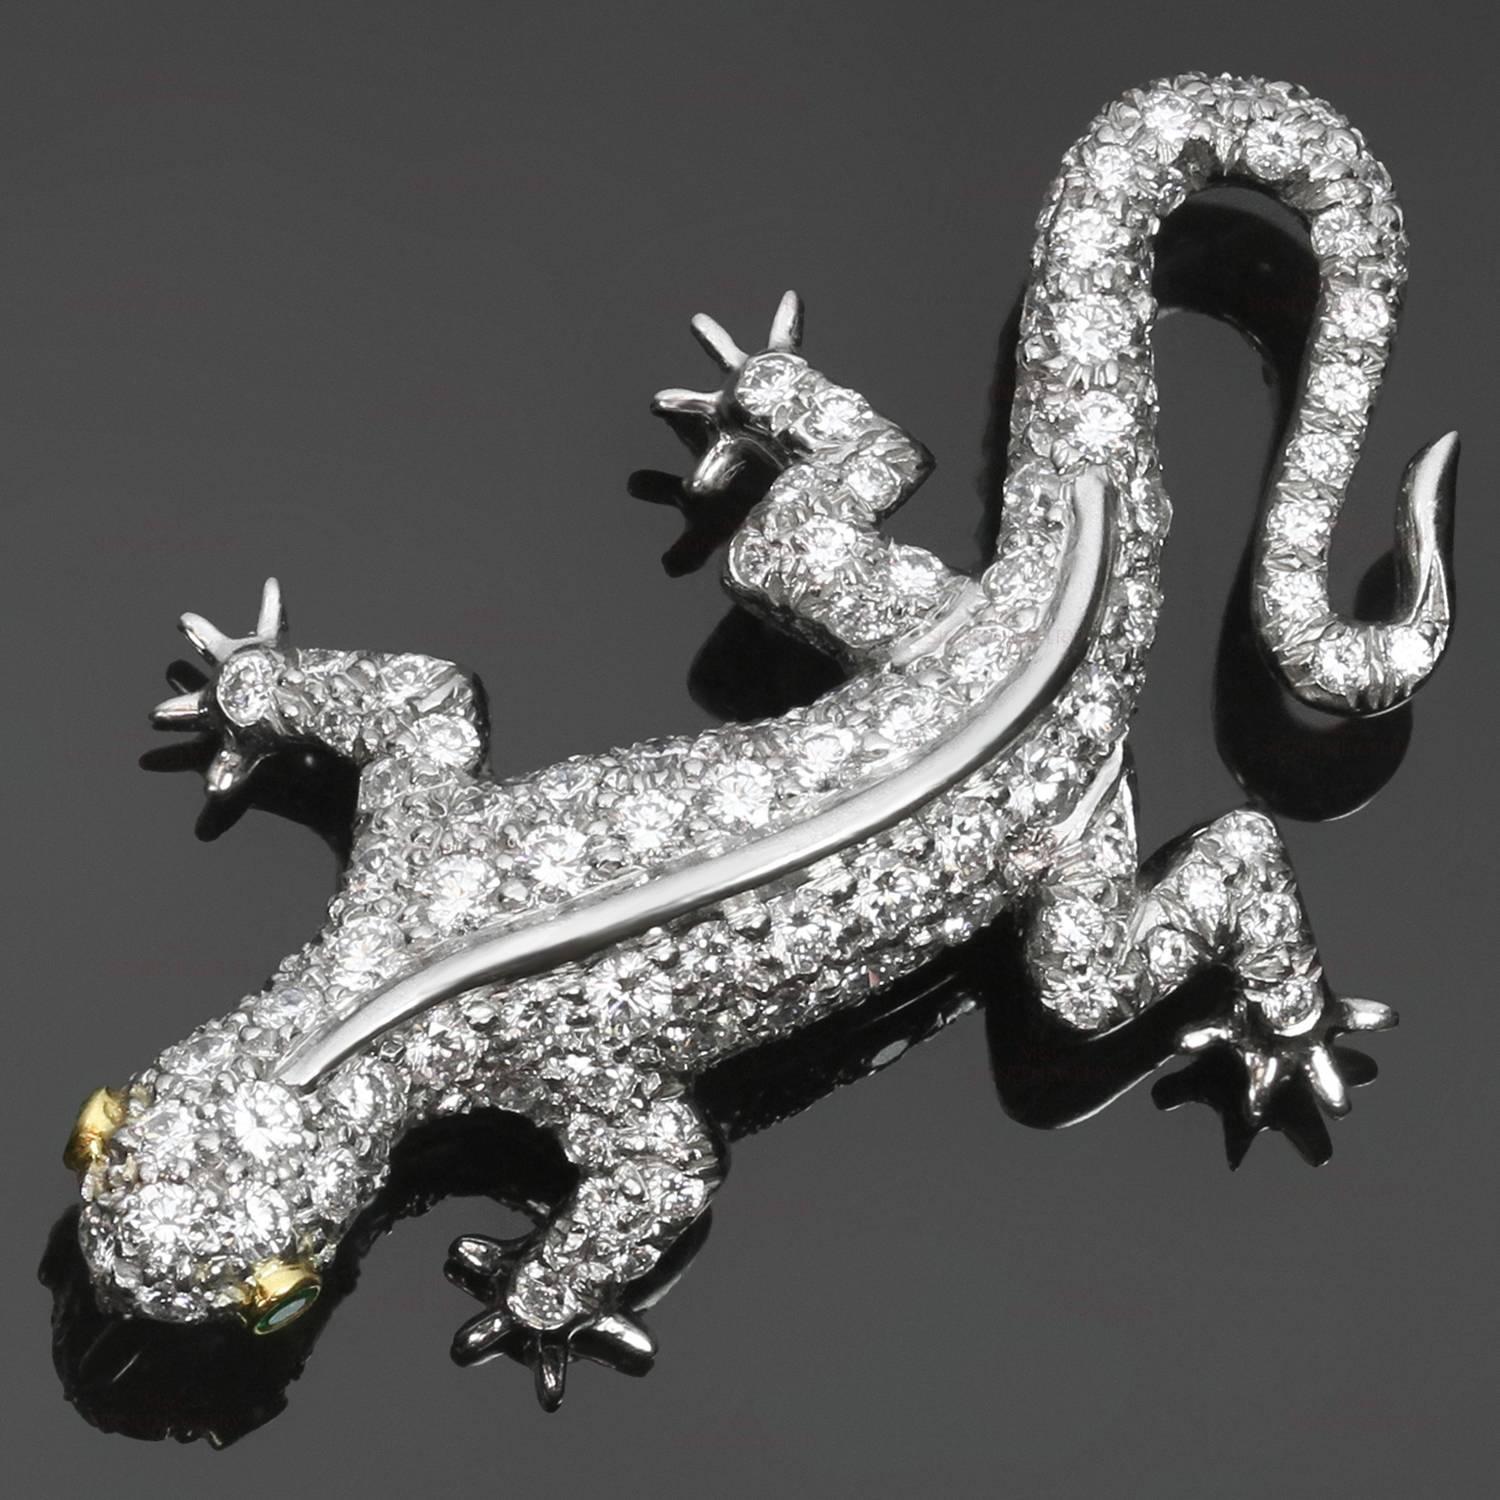 This rare and stunning Tiffany brooch is crafted in platinum in the shape of a salamander and pave-set with sparkling brilliant-cut round diamonds of an estimated 1.30 carats and completed with faceted emerald eyes of an estimated 0.05 carats